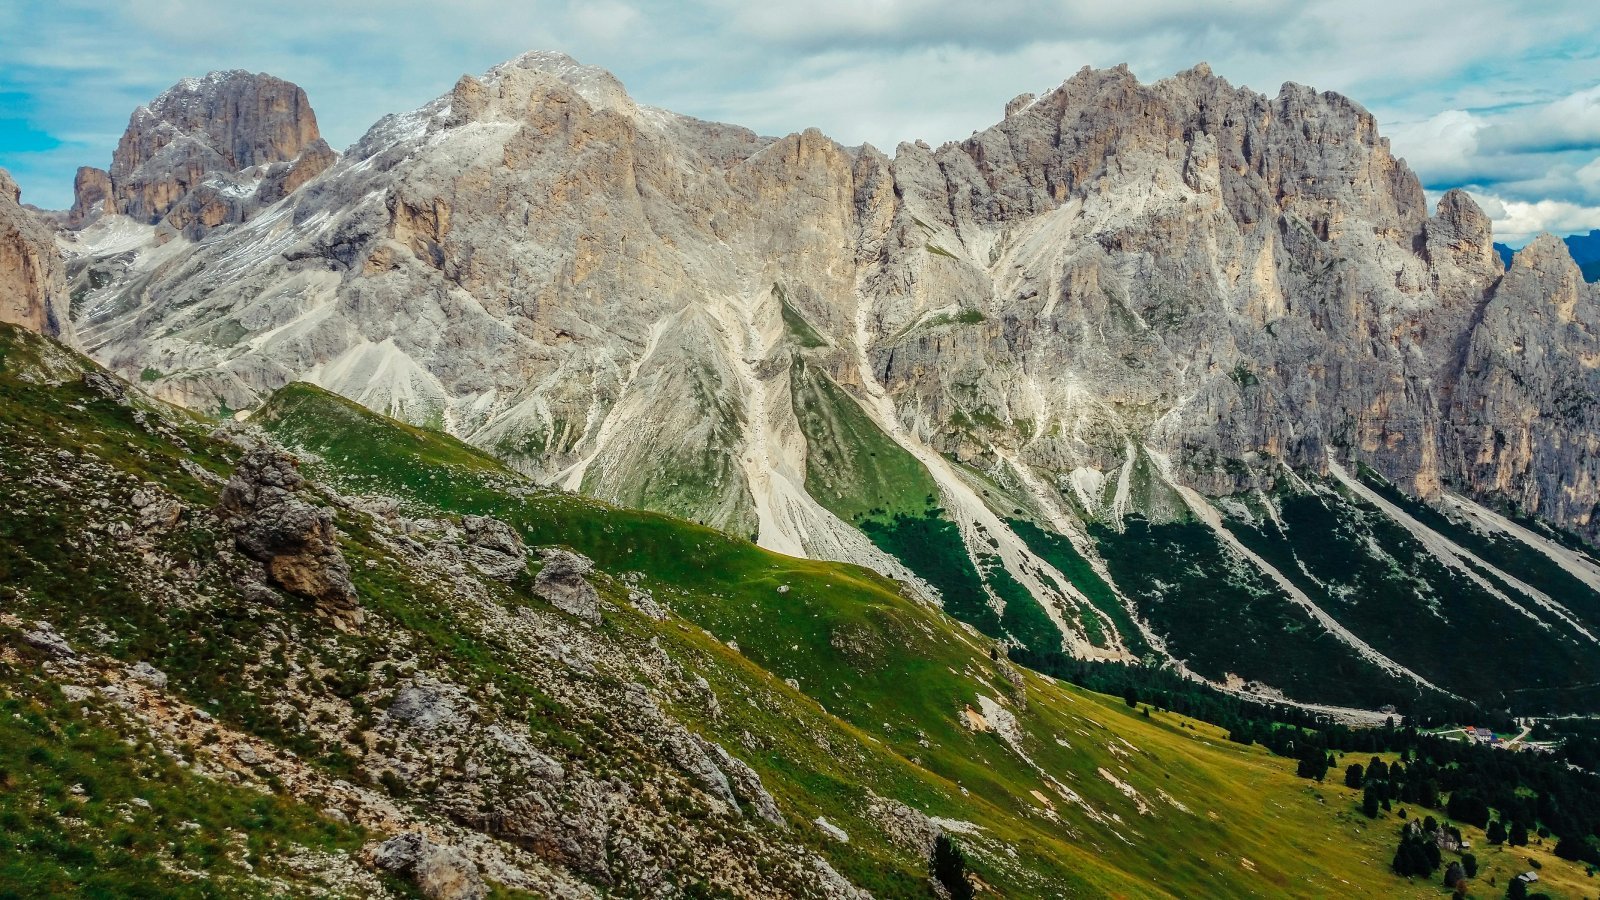 <p class="wp-caption-text">Image Credit: Pexels / J?drzej Koralewski</p>  <p><span>The Rosengarten Group, also known as Catinaccio, is a massif in the Dolomites known for its pink-hued limestone cliffs that glow at sunset. The area is steeped in legend and offers a range of hiking and climbing routes, from leisurely walks to challenging via ferratas. The Vajolet Towers, six striking peaks within the Rosengarten Group, are a particular highlight for climbers.</span></p>